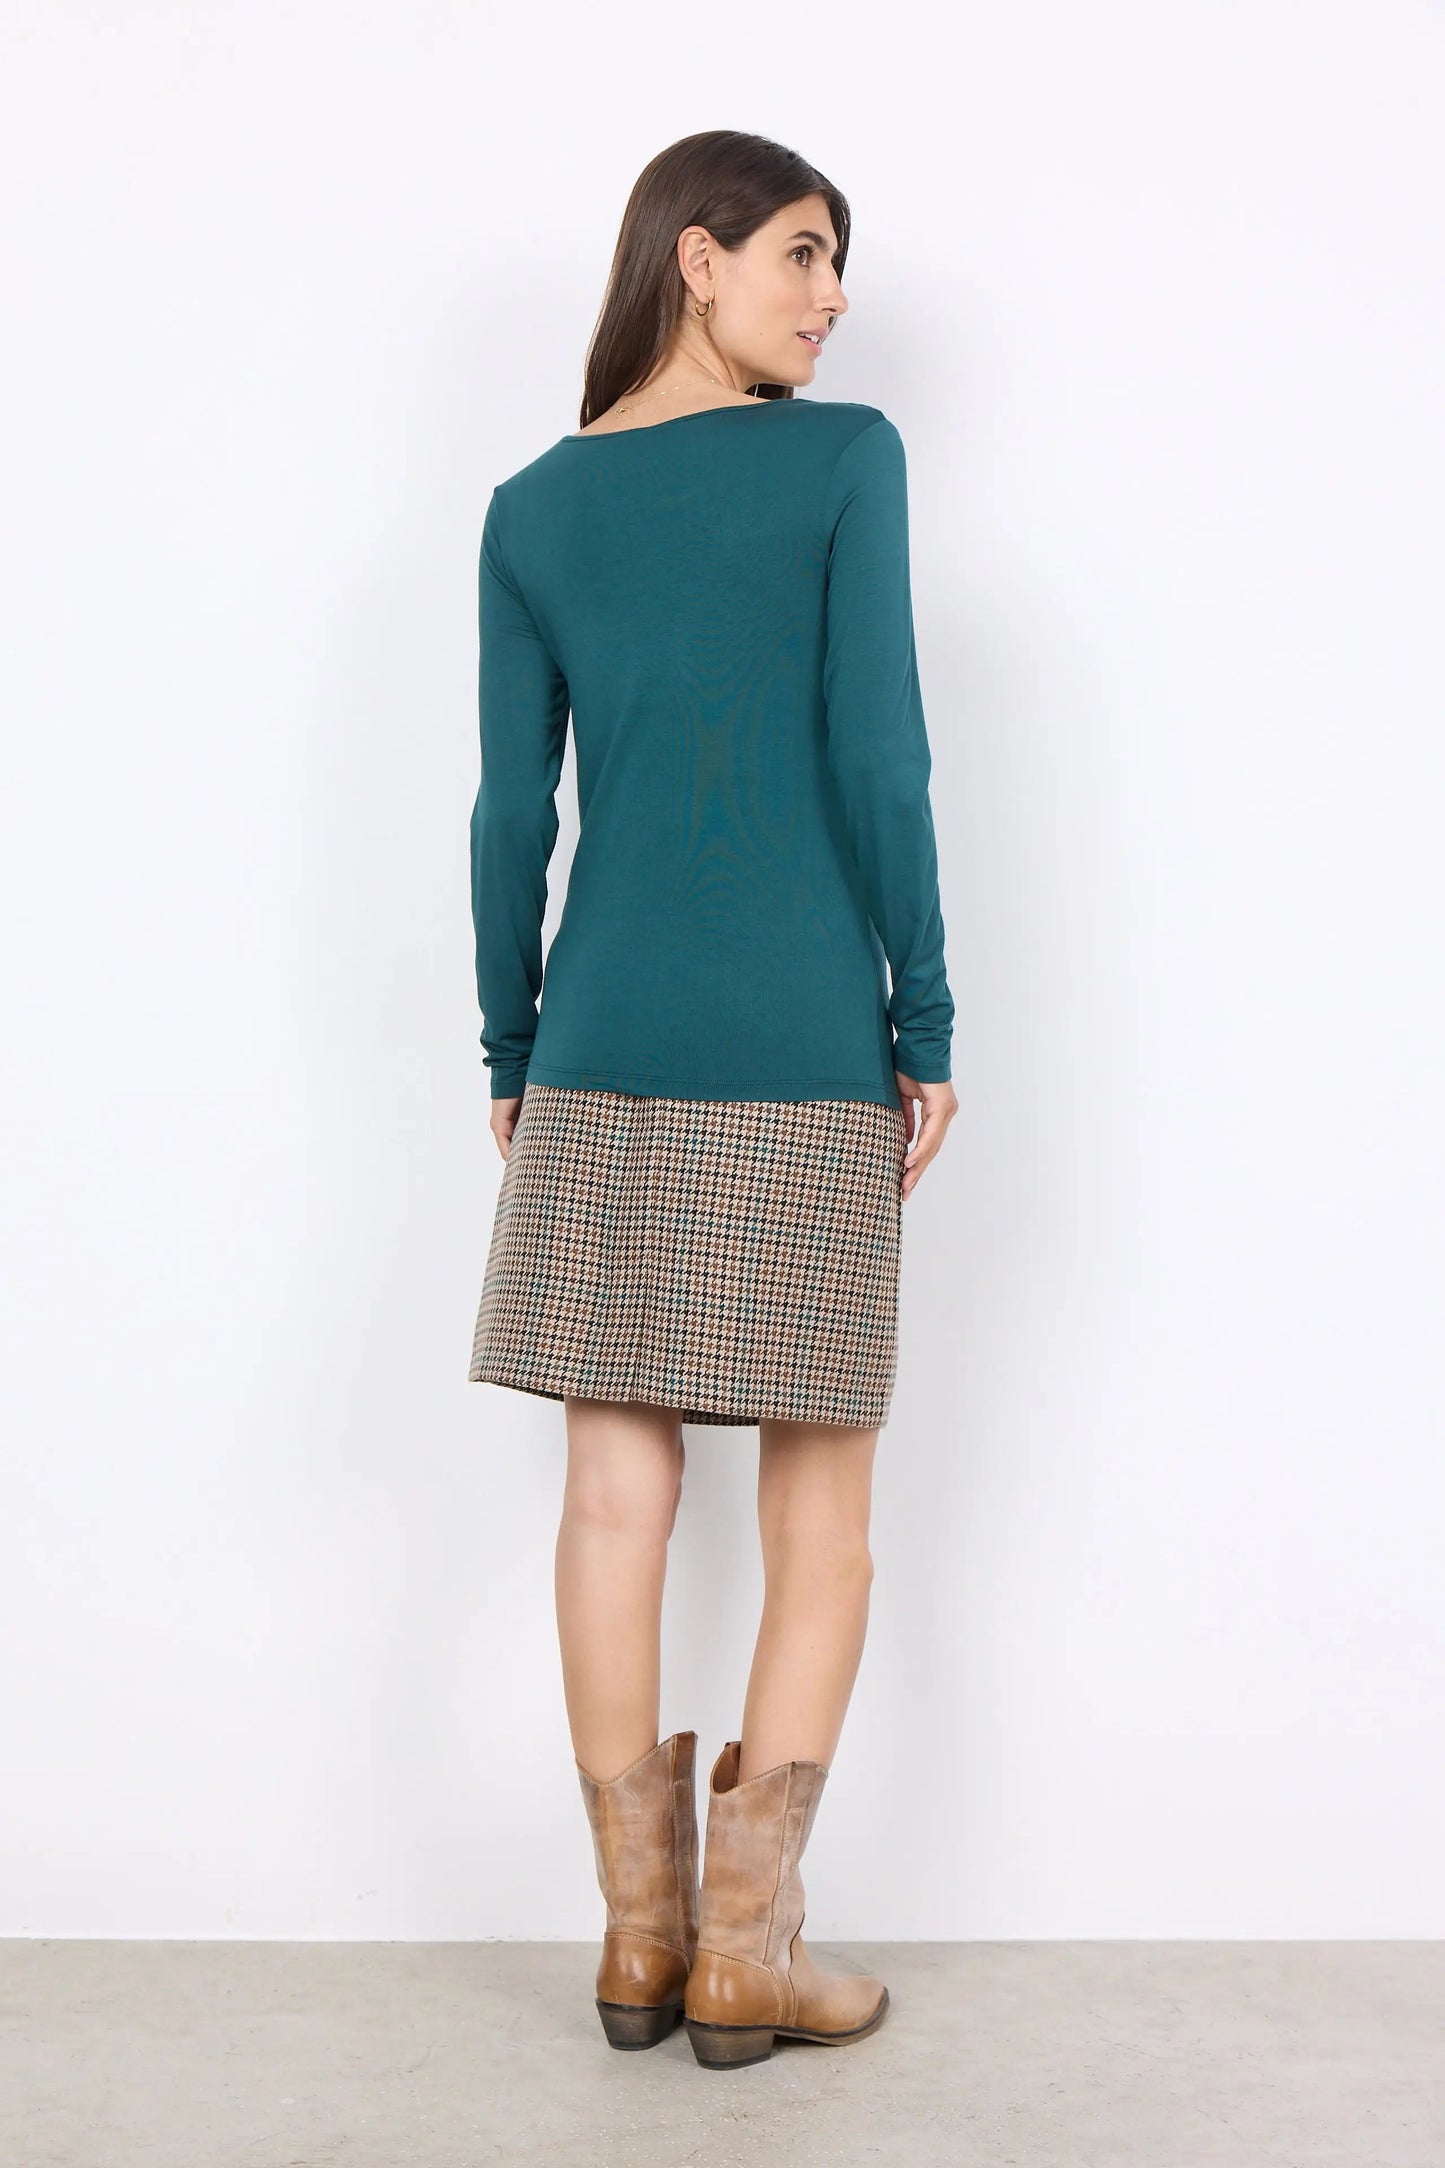 The model is wearing a soft quality Marcia 217 Rounded Neck Blouse with a checkered skirt. (Brand Name: Soya Concepts)